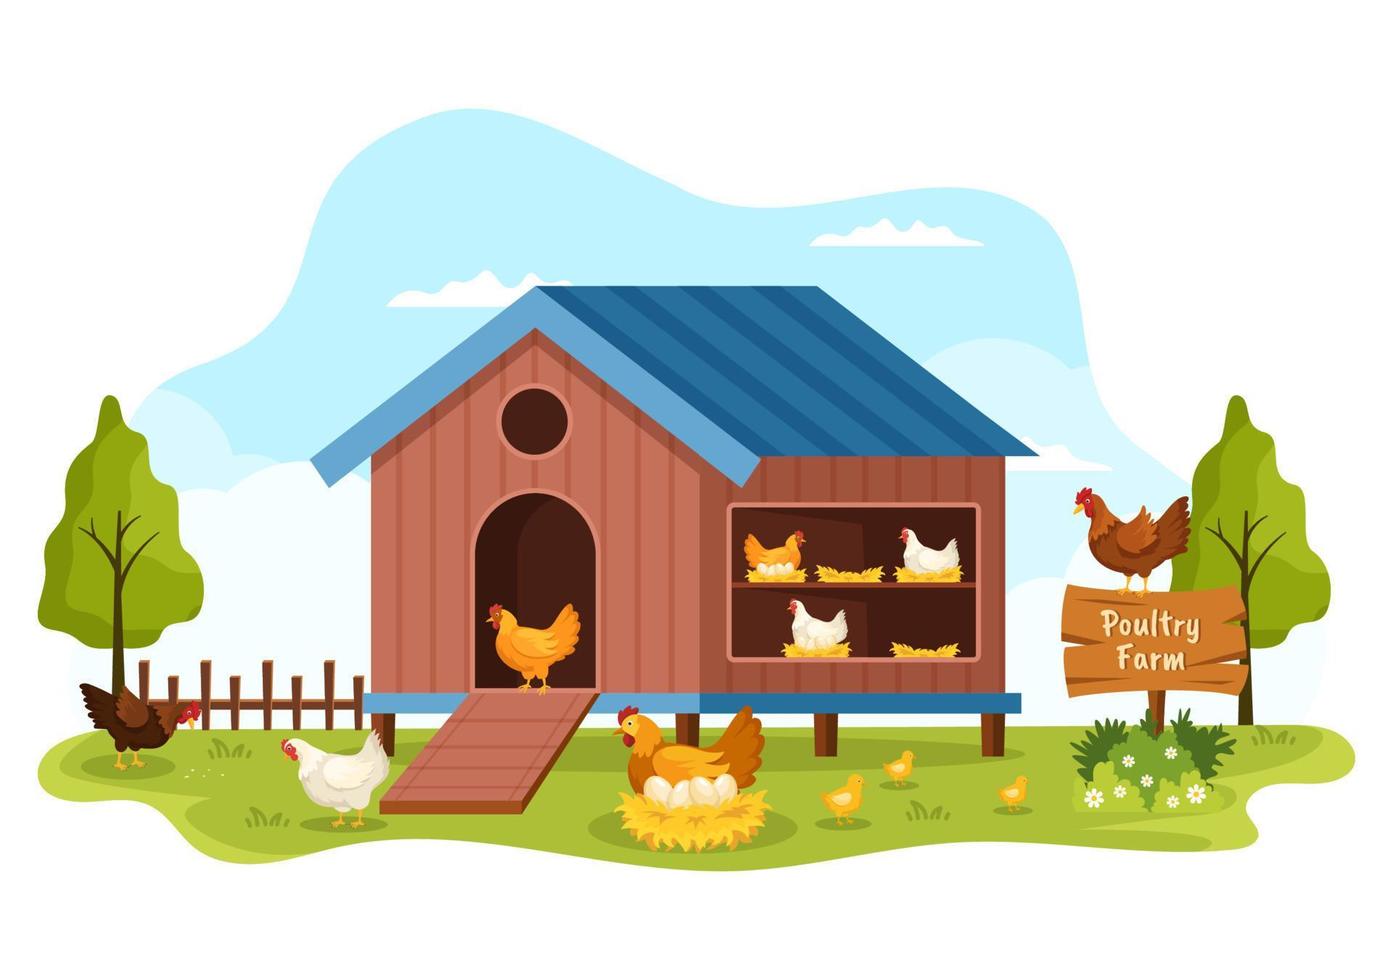 Poultry Farming with Farmer, Cage, Chicken and Egg Farm on Green Field Background View in Hand Drawn Cute Cartoon Template Illustration vector